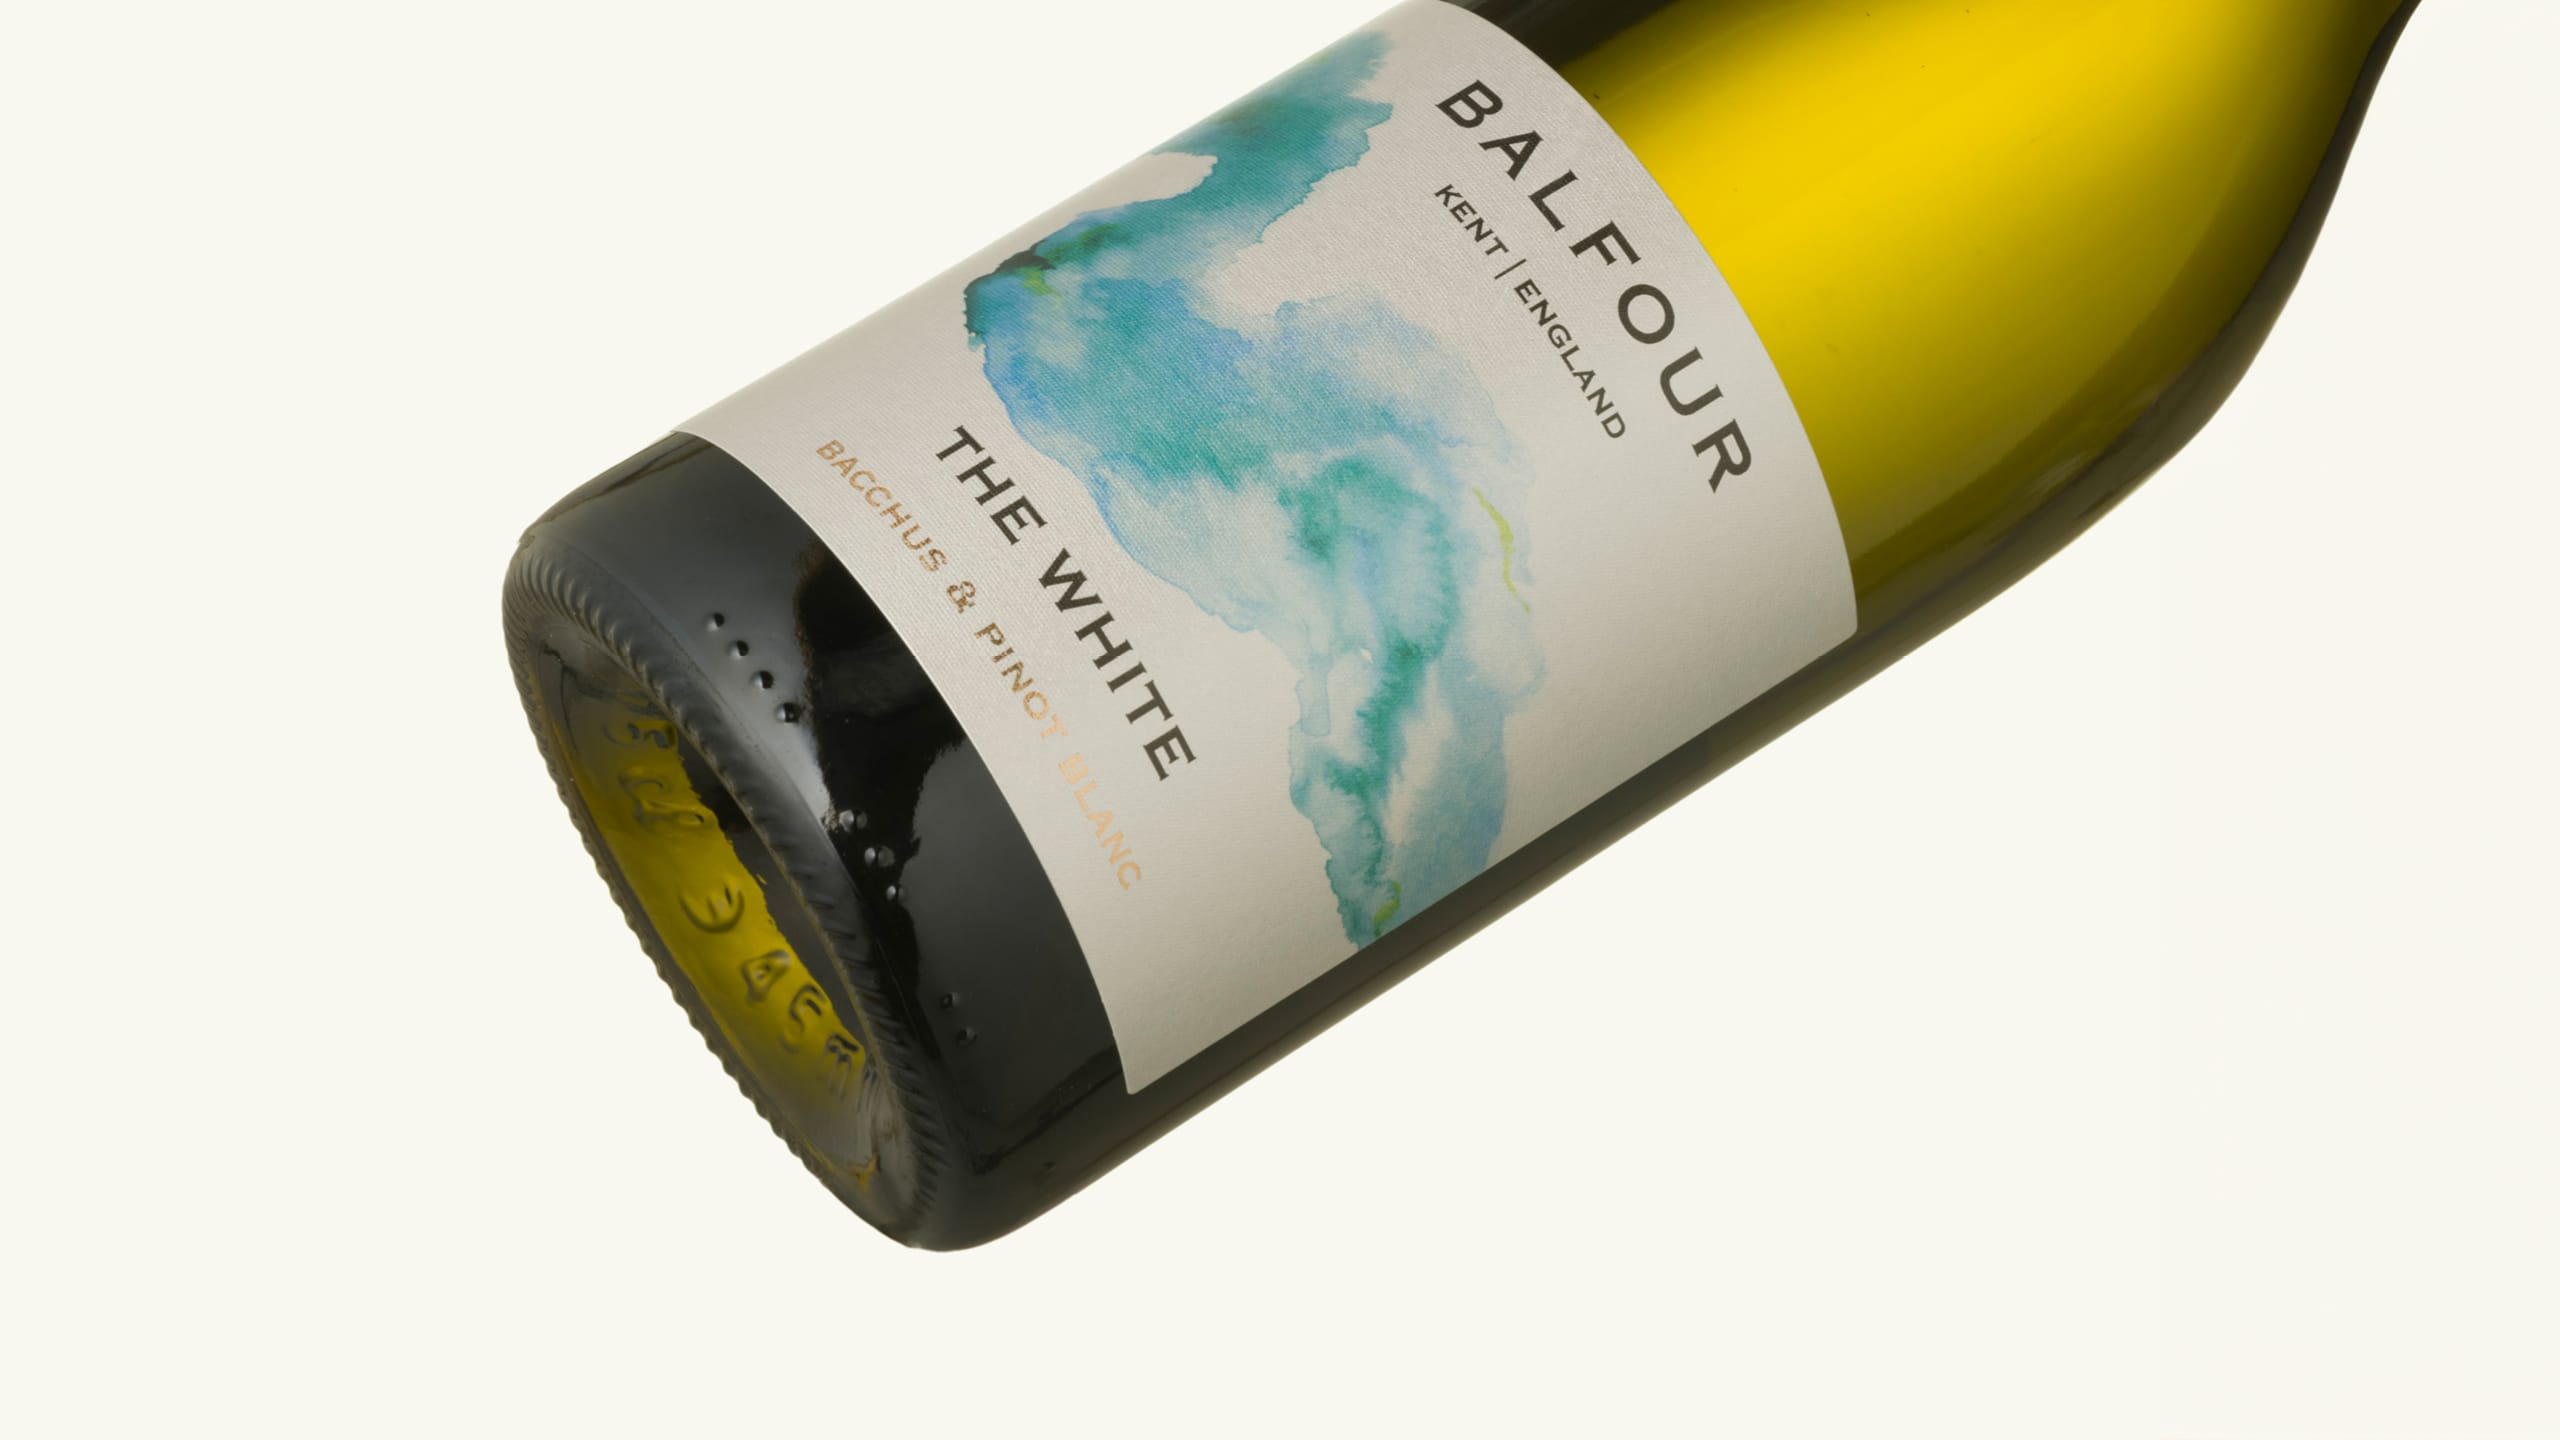 Balfour Winery The White: Packaging, Website design and development